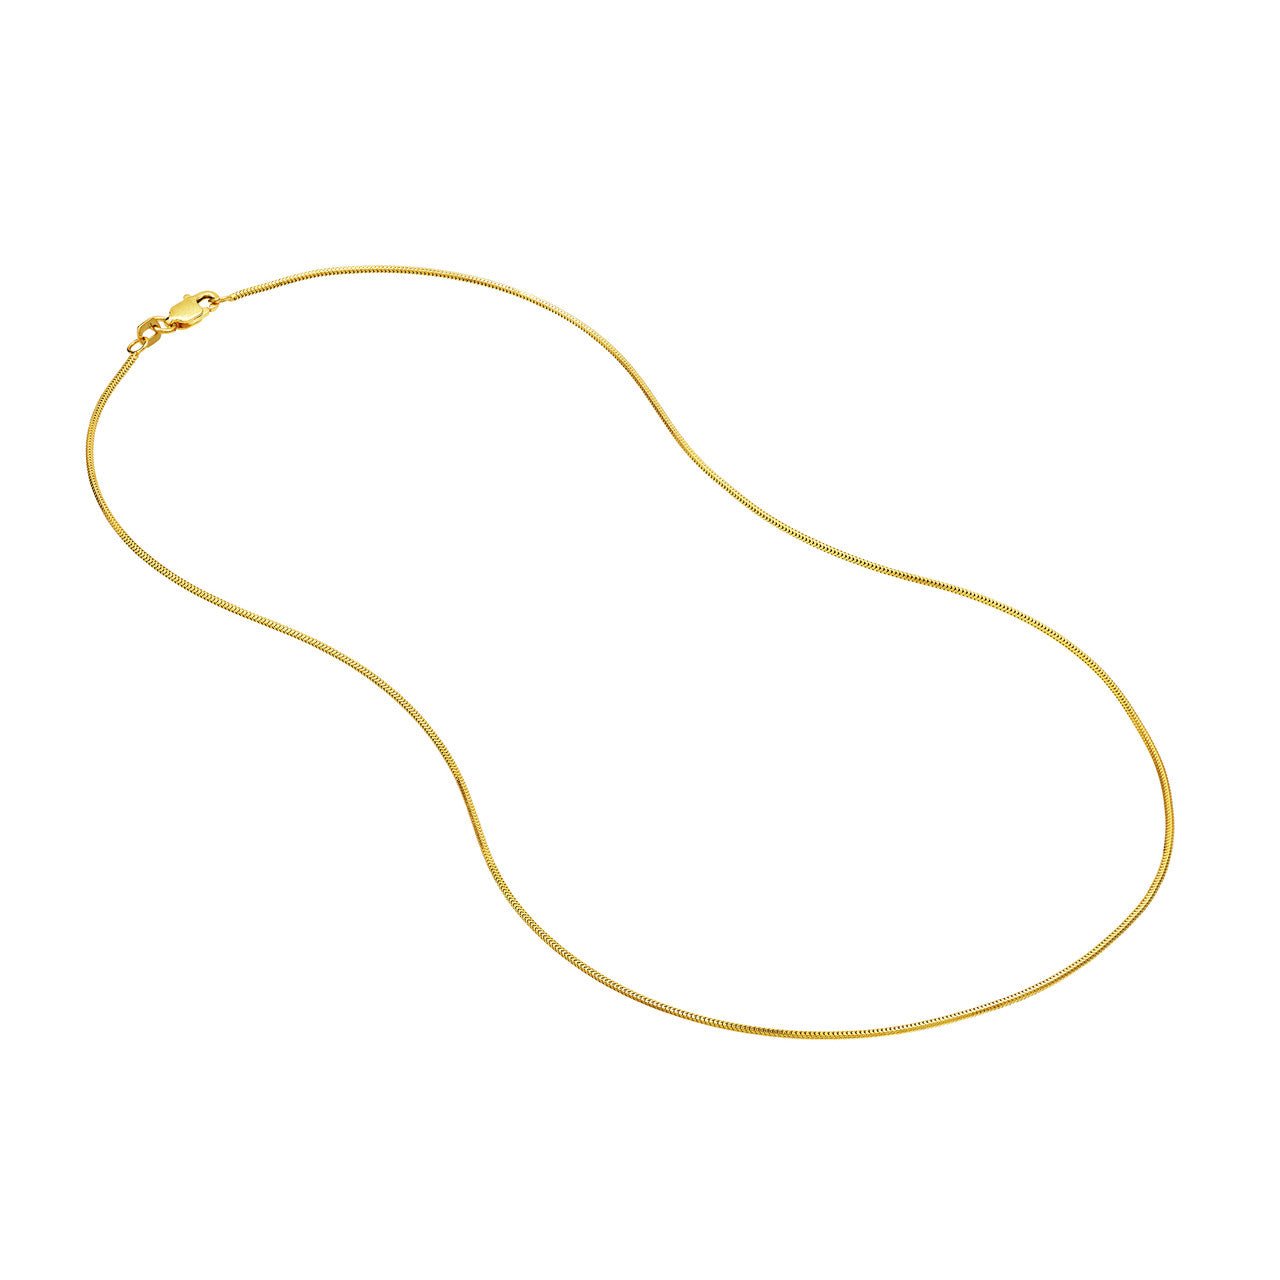 Herringbone Chain Necklace In 14K Solid Yellow Gold, 16